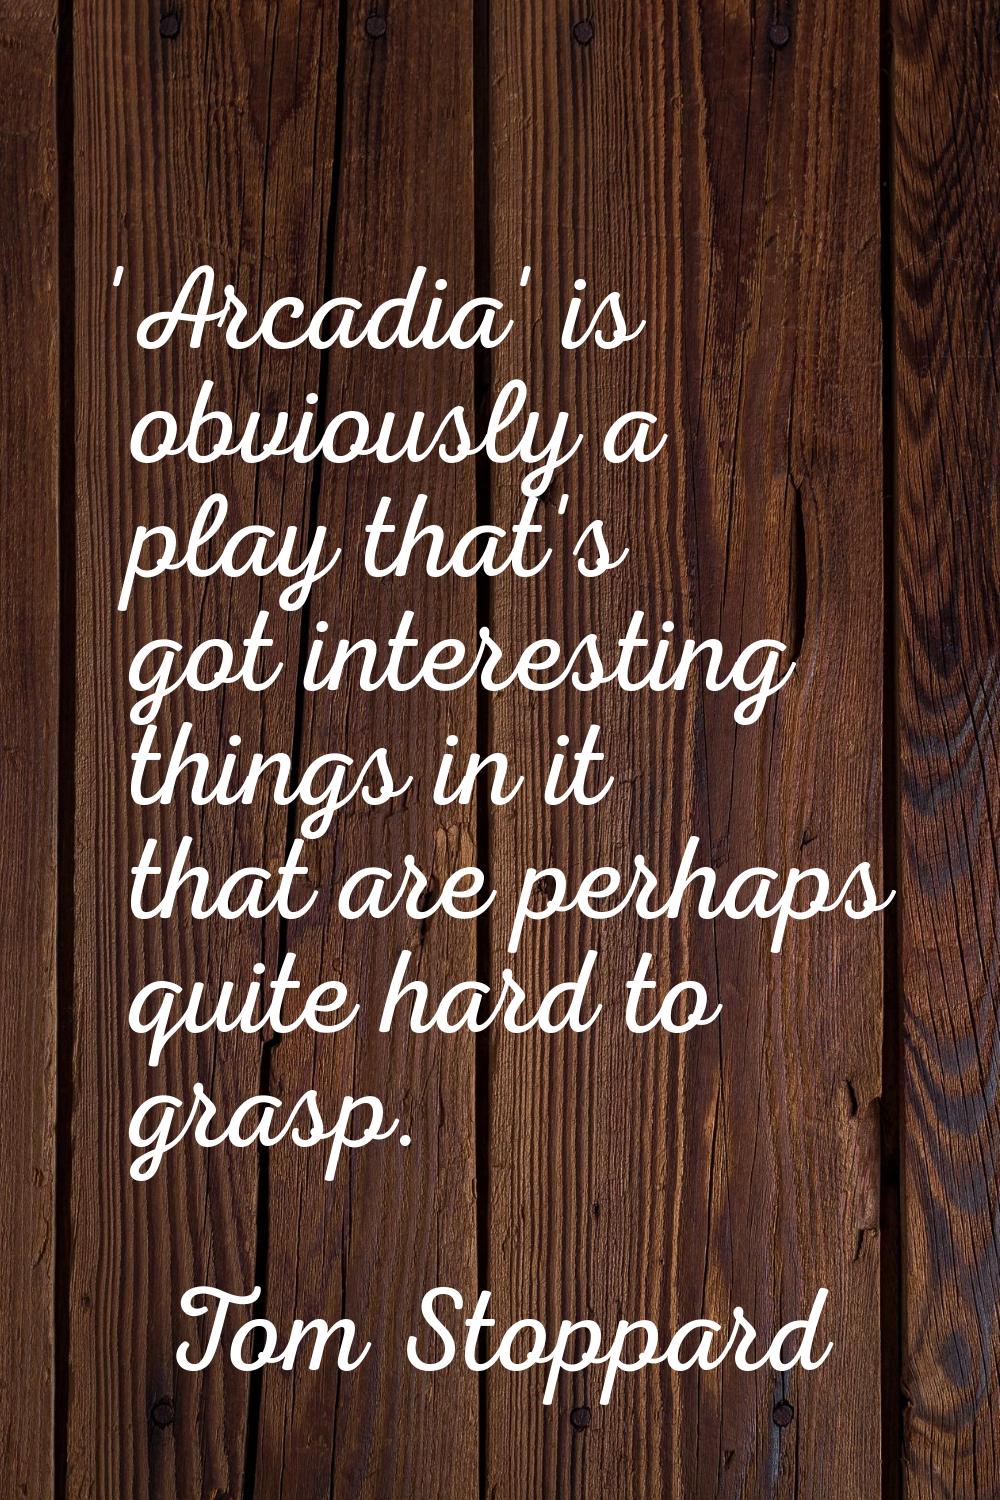 'Arcadia' is obviously a play that's got interesting things in it that are perhaps quite hard to gr